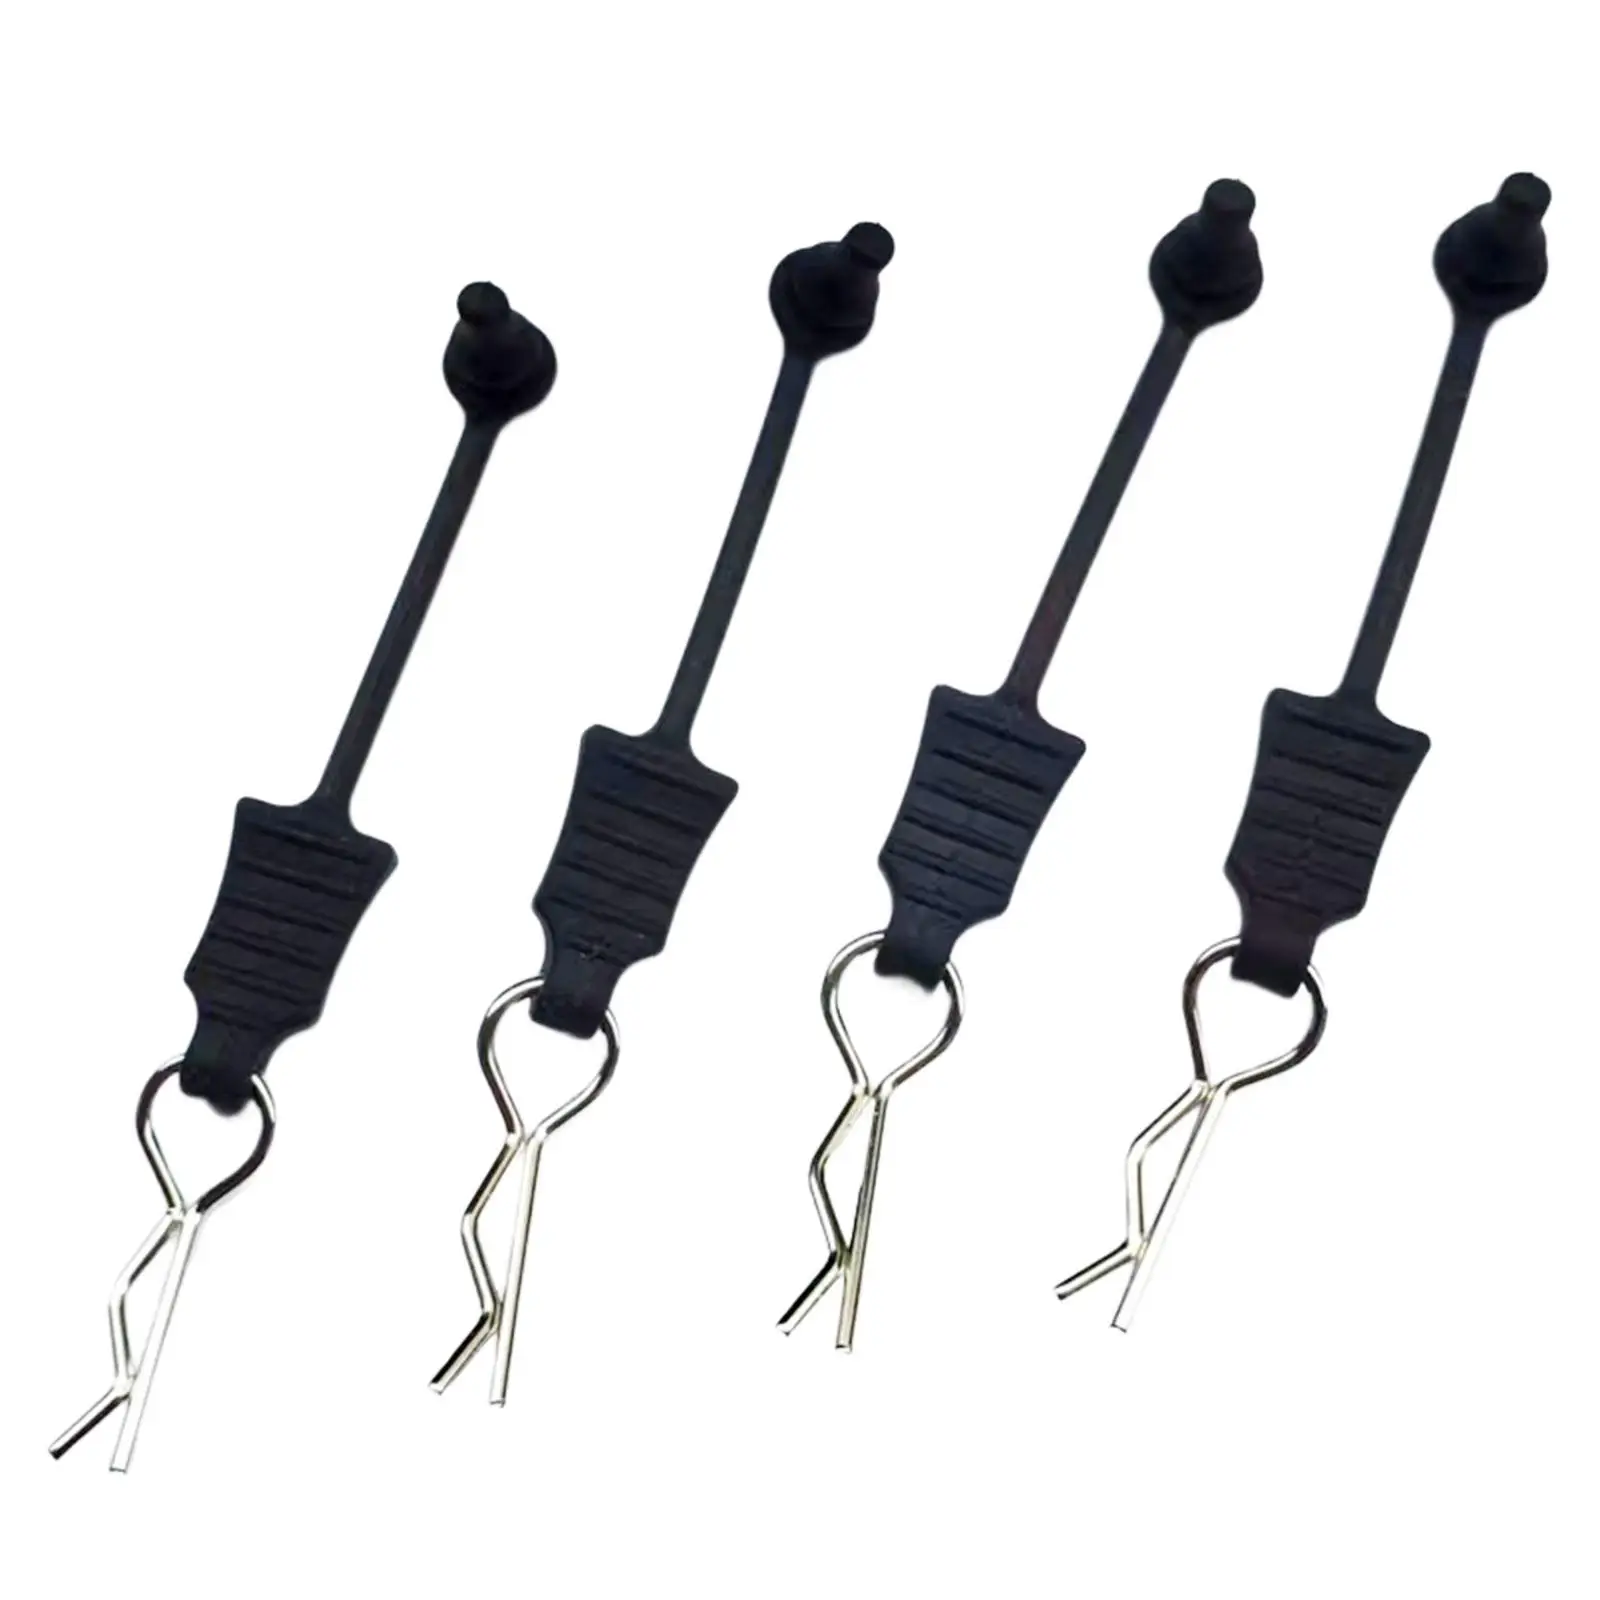 

4x Body Clip with Fixing Bracket RC Shell Pin R Type Pin RC Body Clips Pins for RC Hobby Car Model Crawler Trucks Vehicles